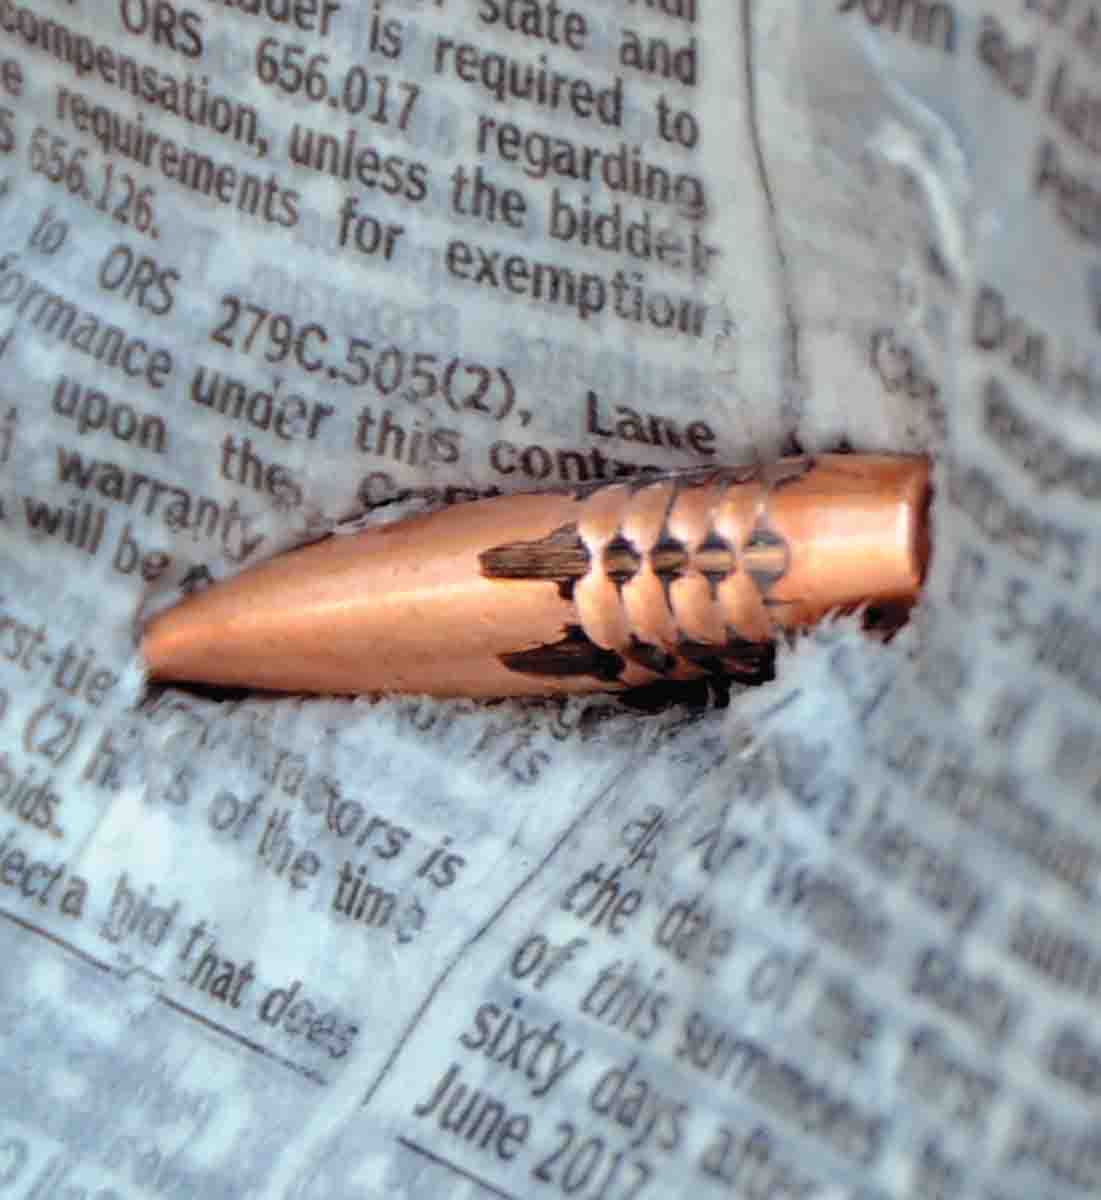 It is common for bullets to tumble at low velocity, and they are sometimes recovered sideways to the line of bullet travel.